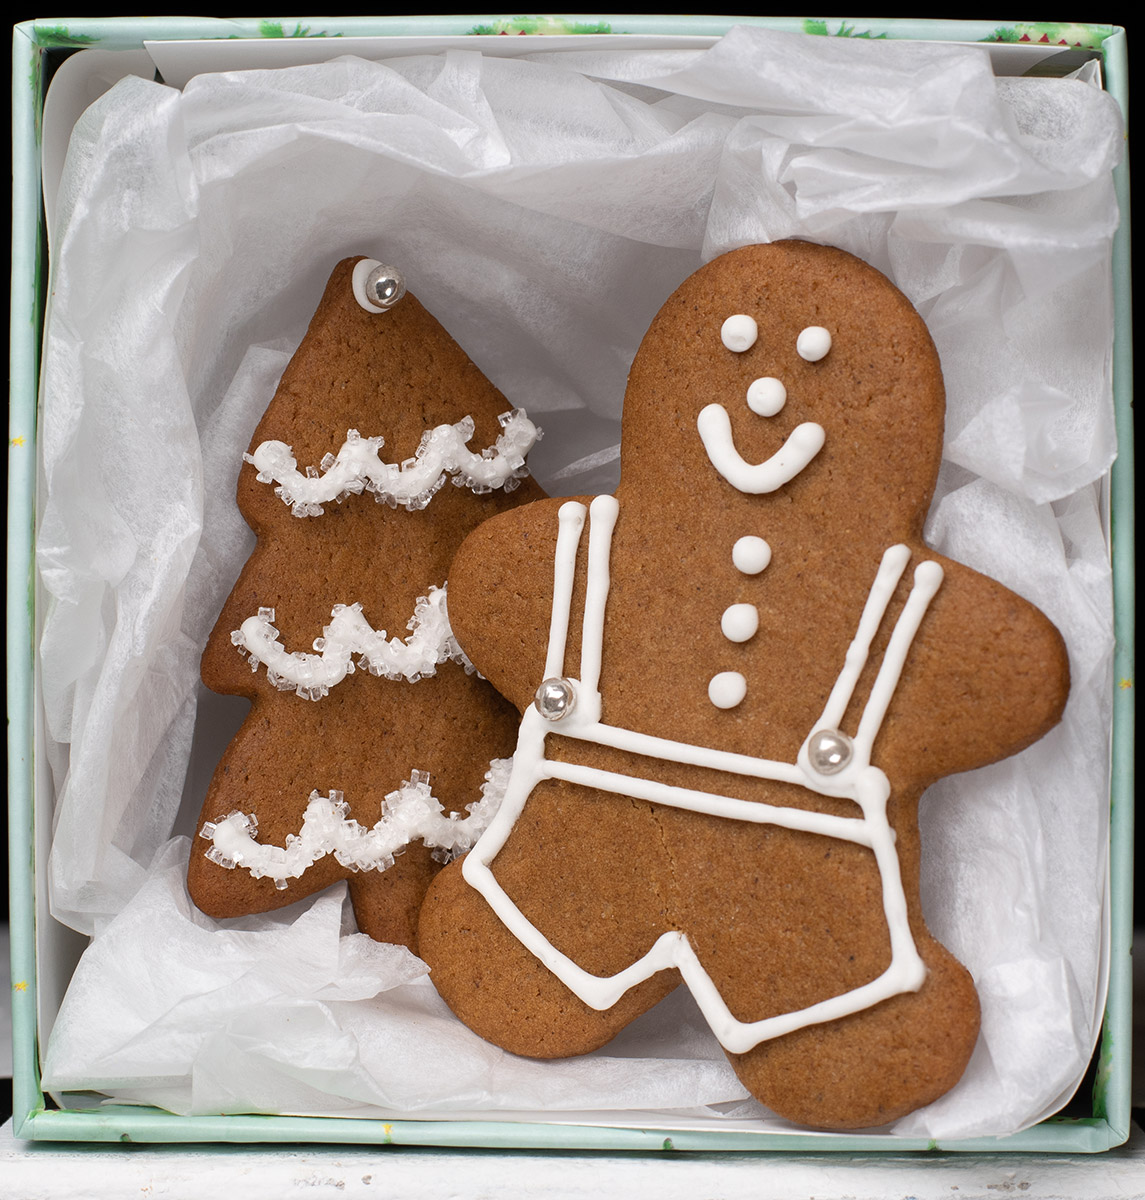 Gingerbread cookies in a box with white tissue paper